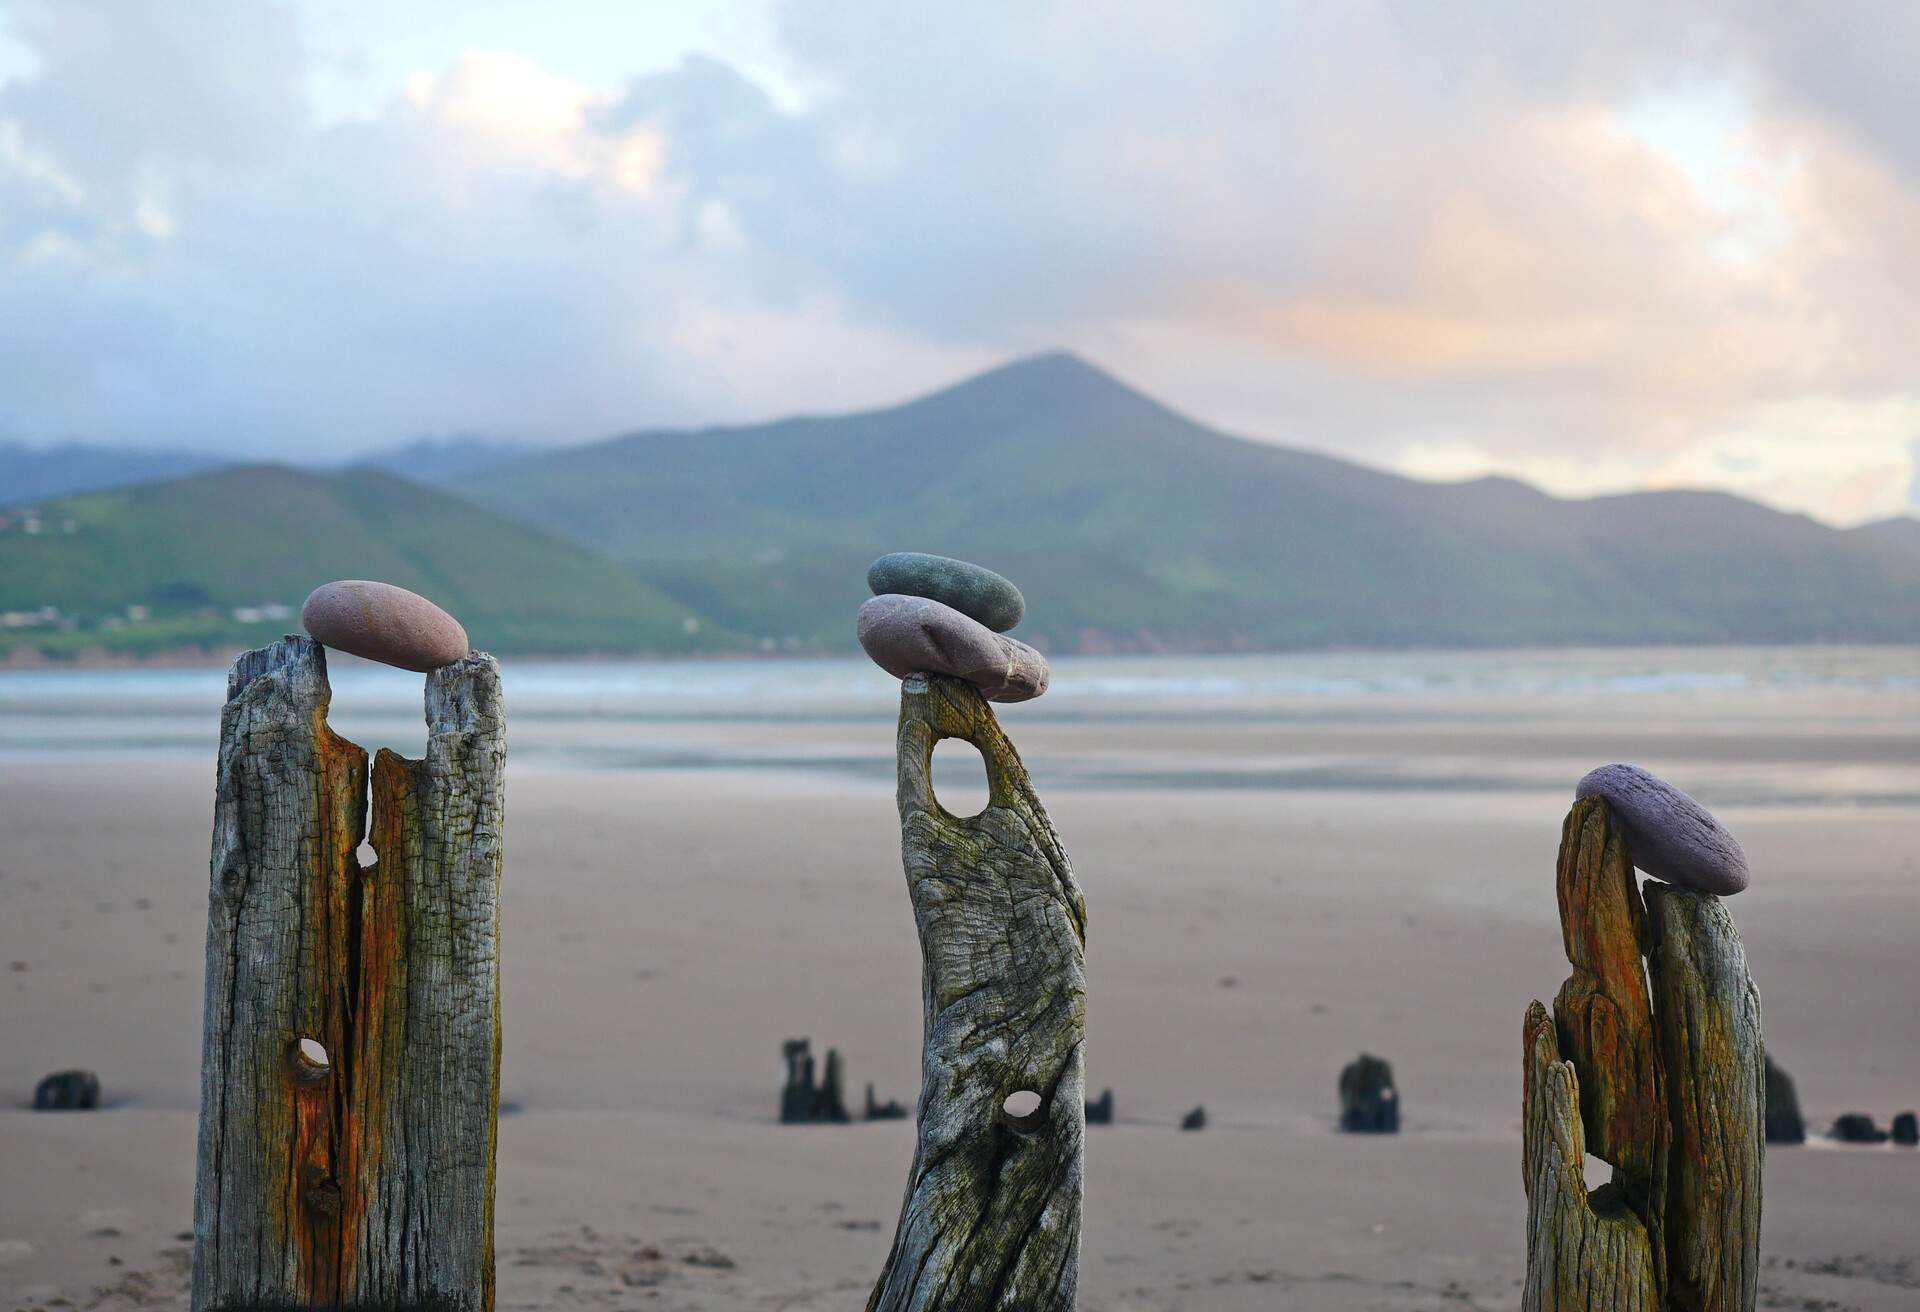 Pebbles balancing on 3 stumps of wood from a shipwreck on Rossbeigh beach, Ireland with Seefin Mountain in the distance.